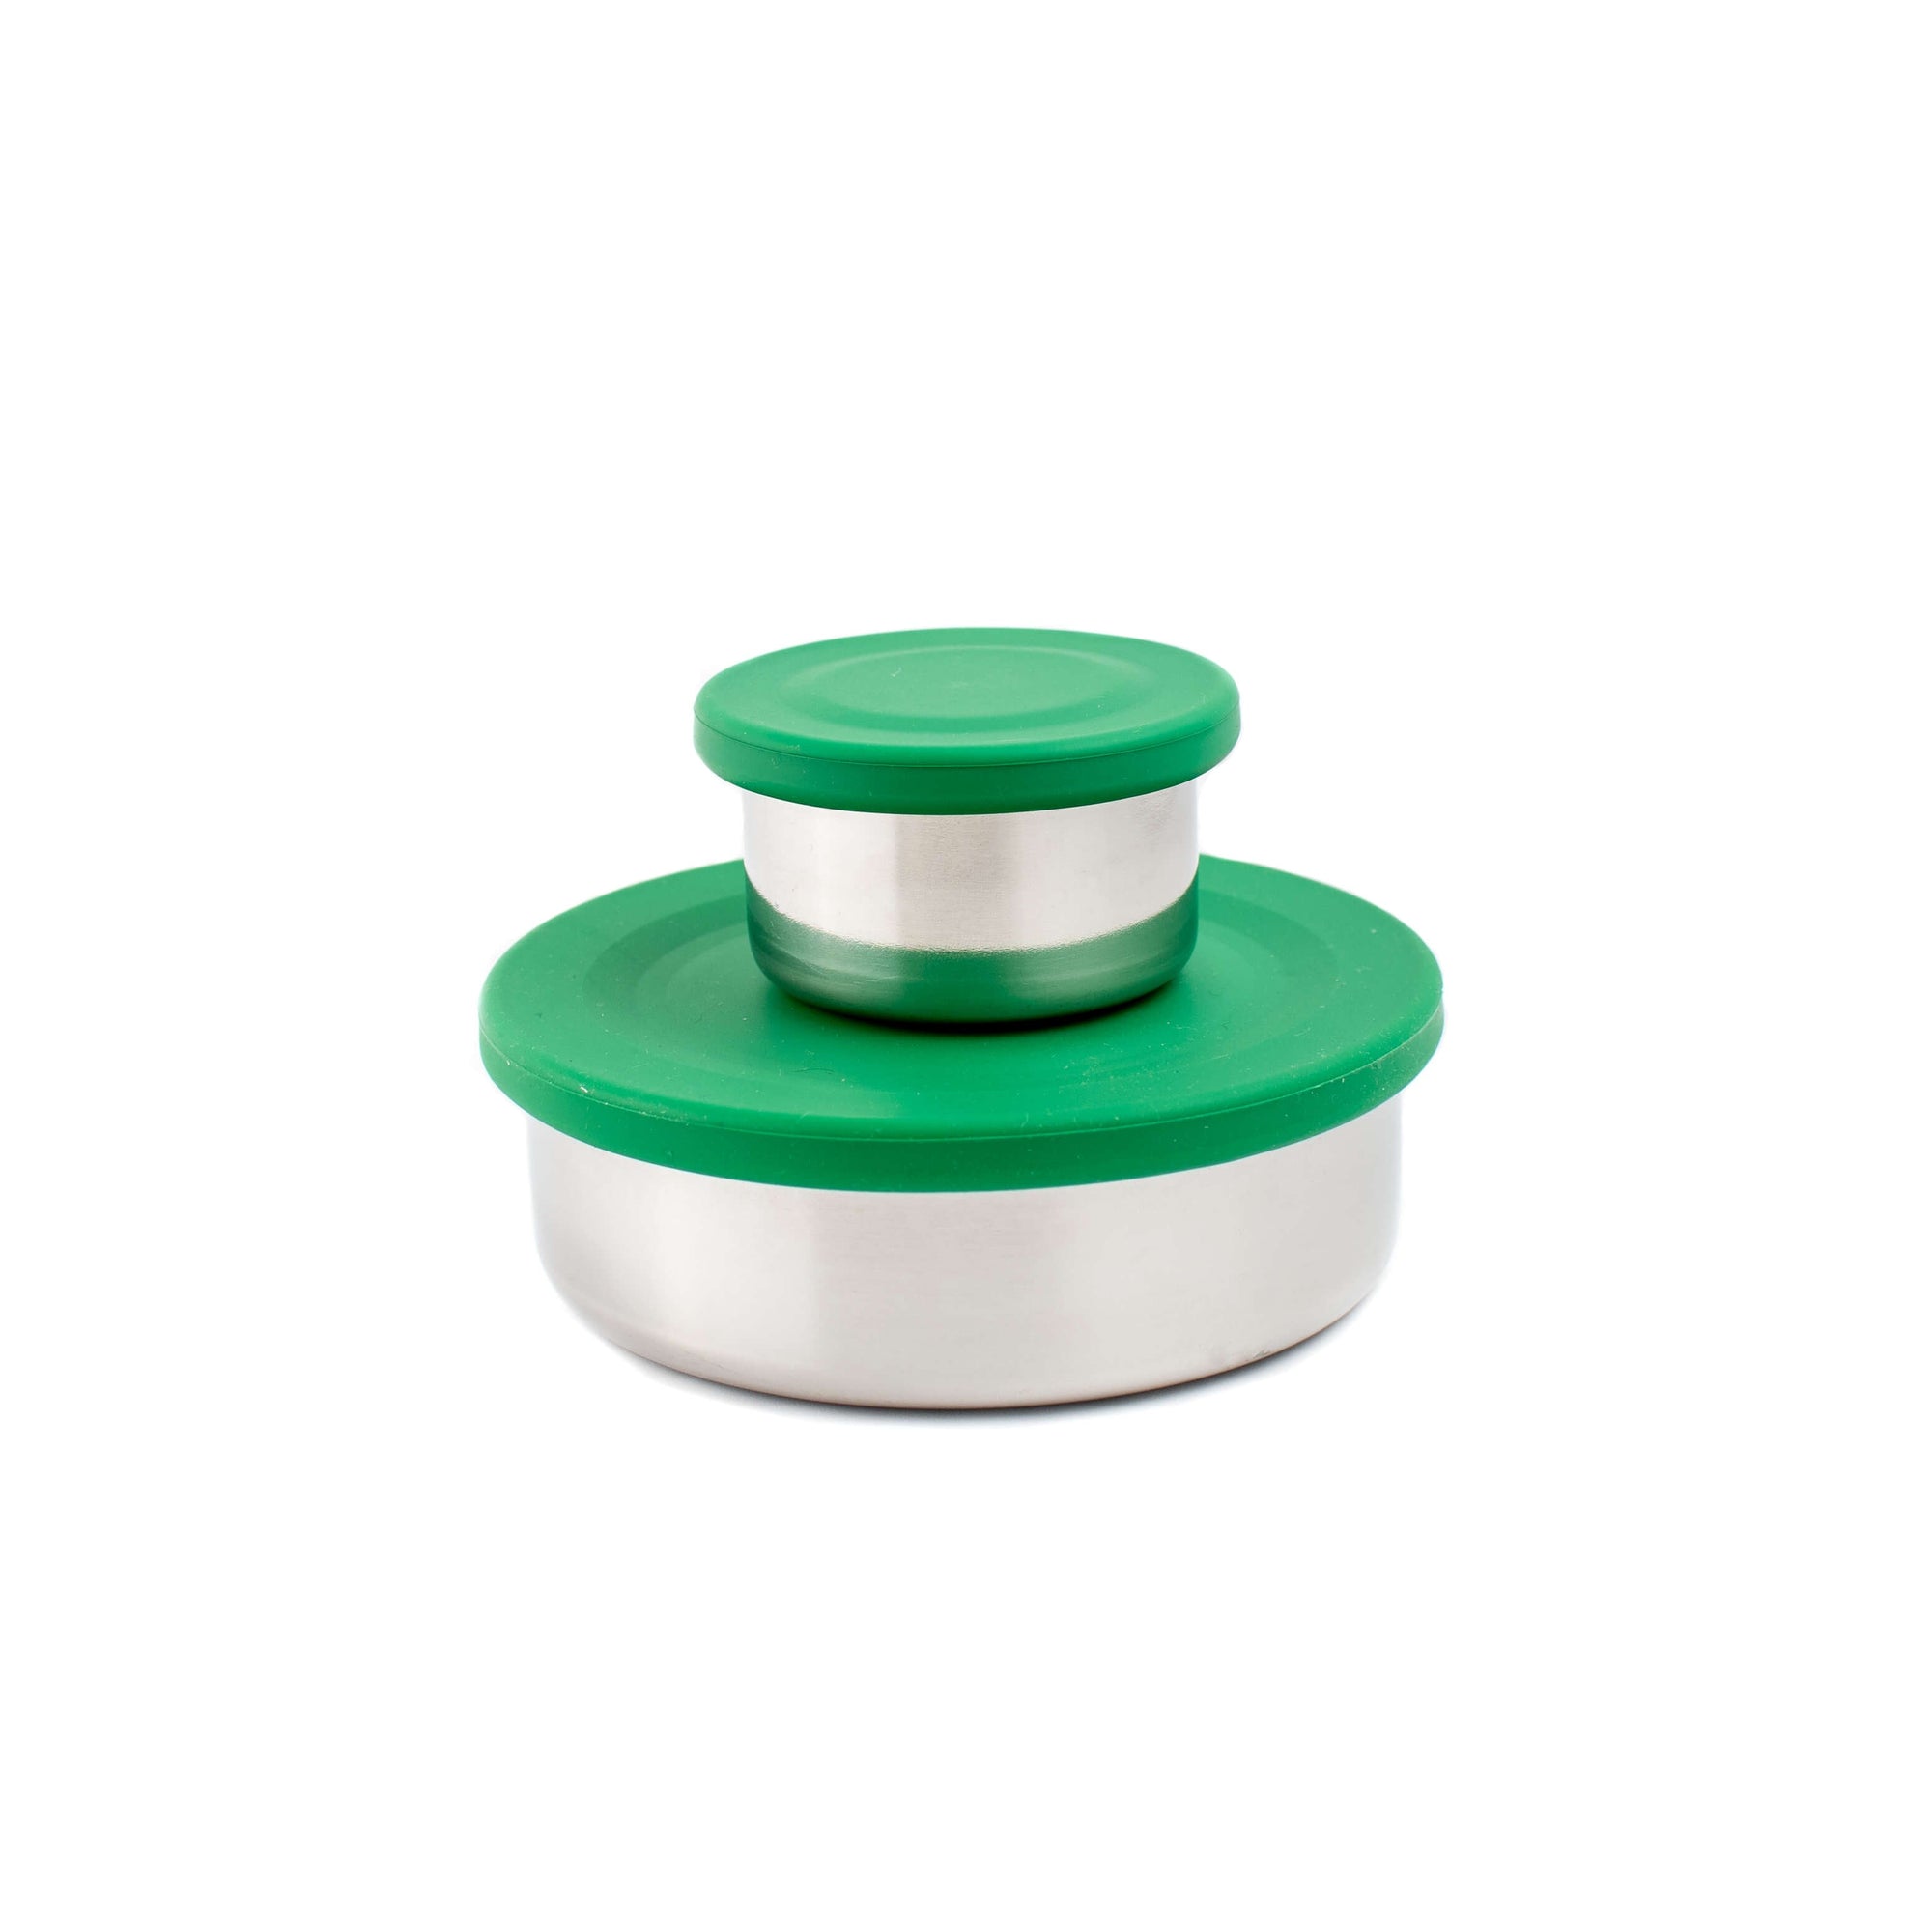 Ecococoon Stainless Steel Snack Pots - Green